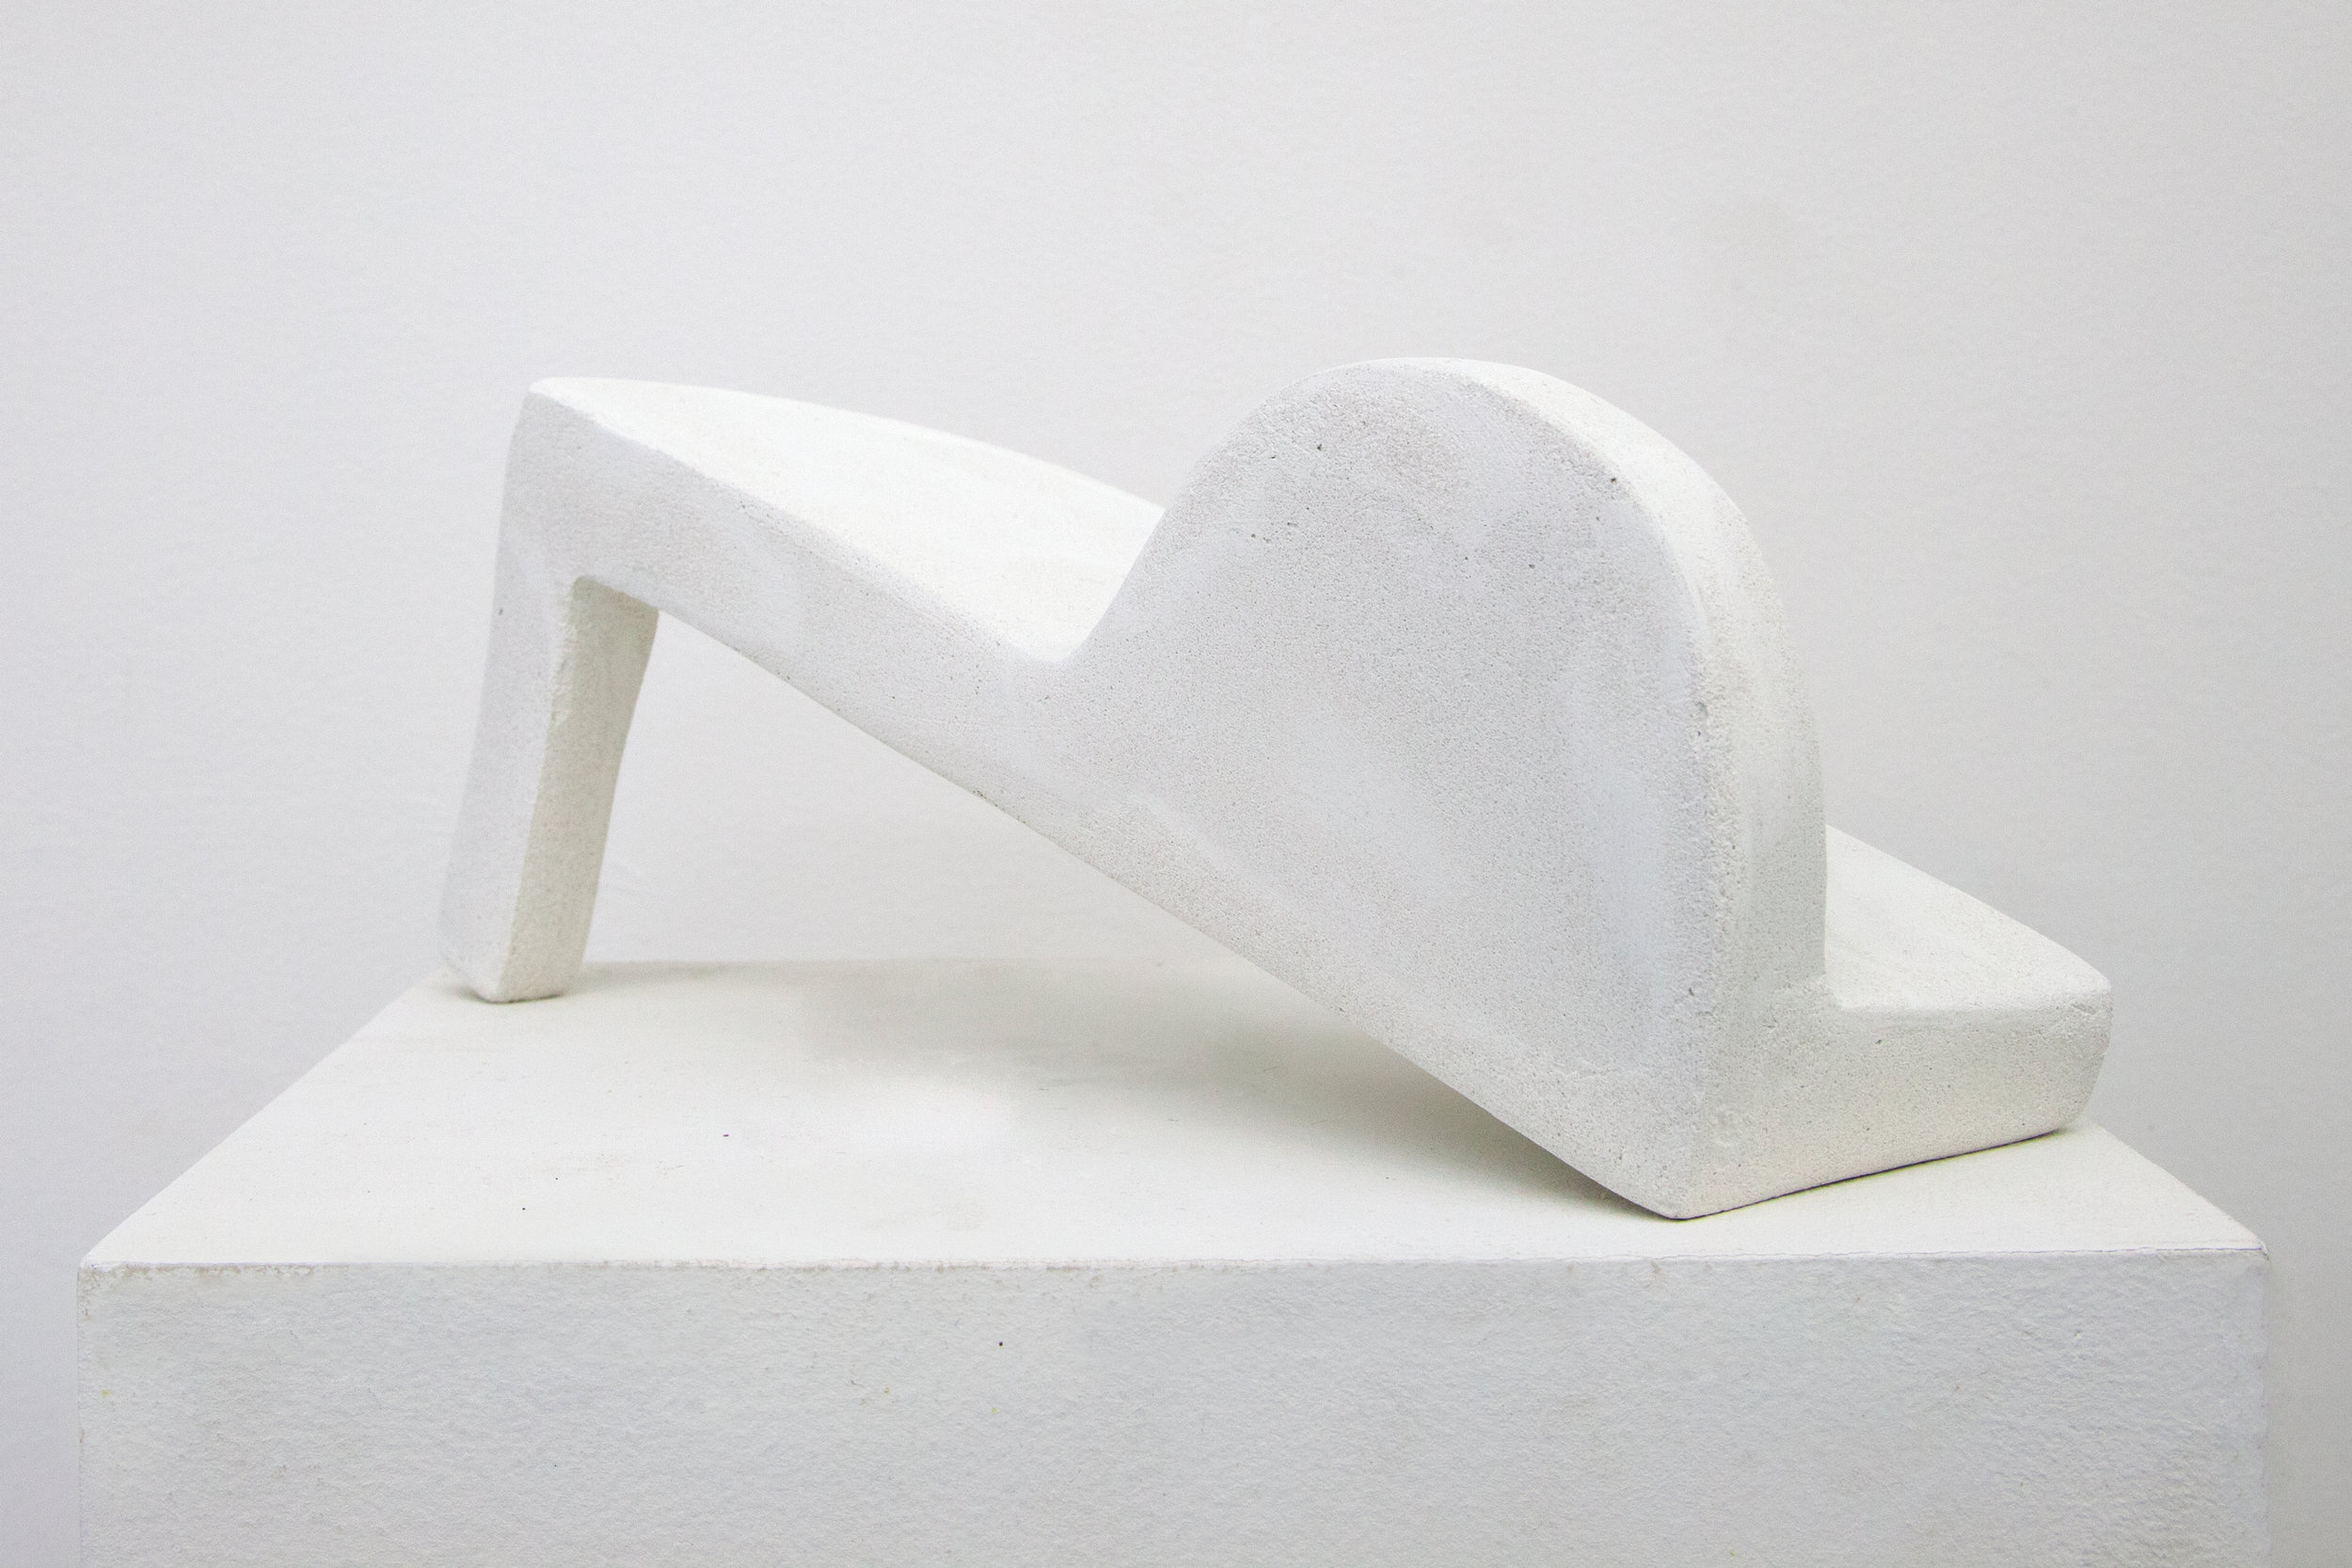  Elizabeth Atterbury,  White Note , 2018, Mortar and Basswood, 10.50 x 3.50 x 4.25 in 